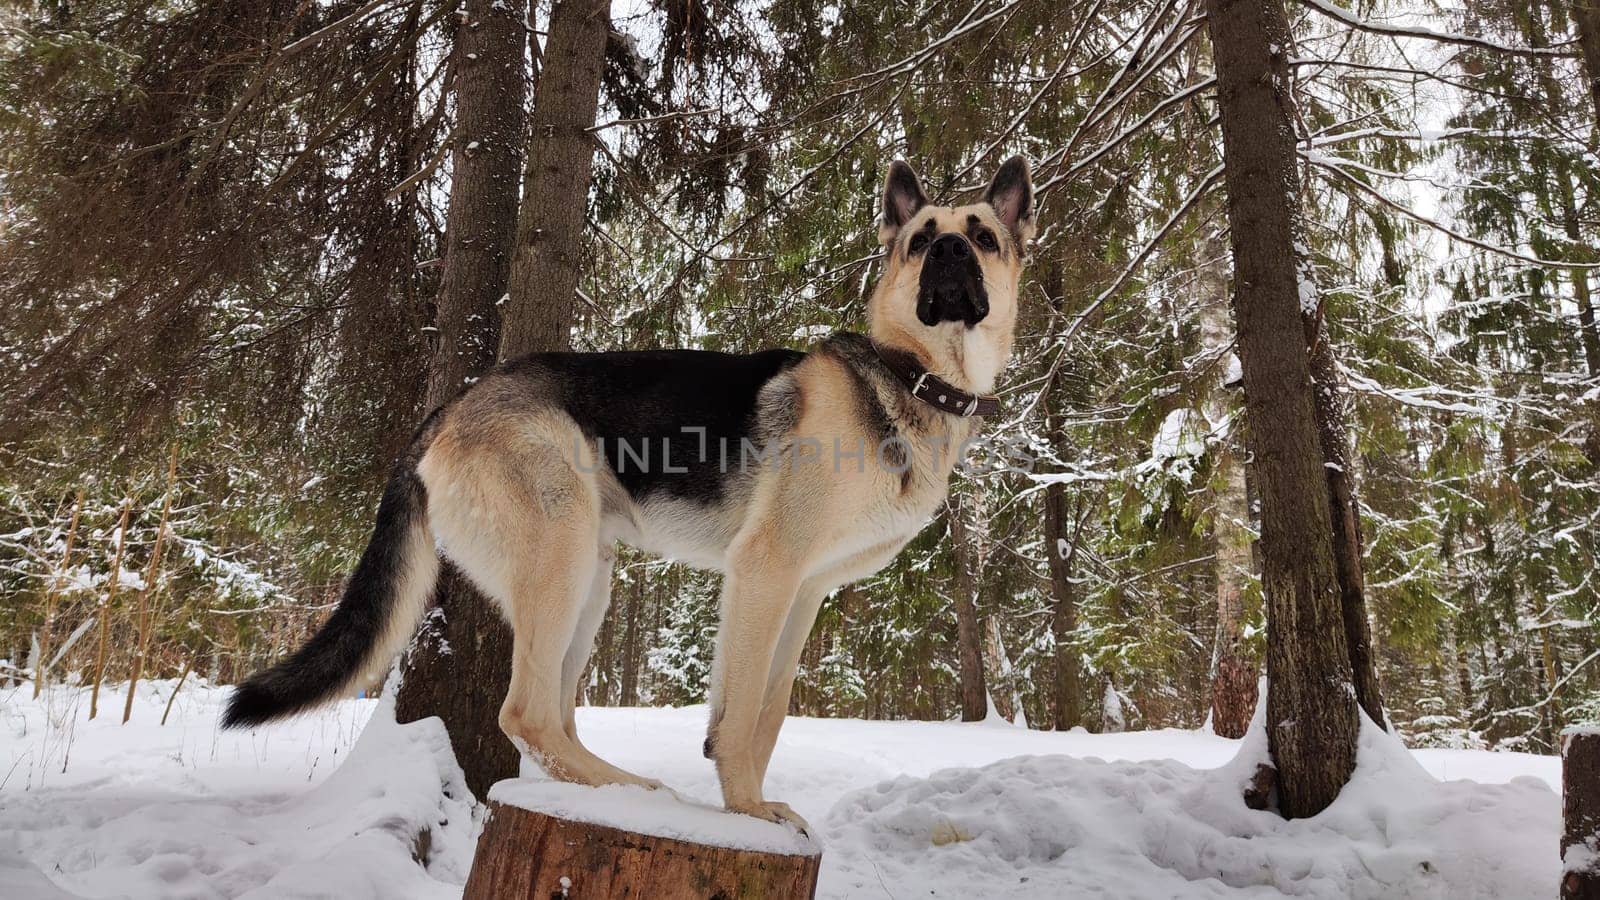 Dog German Shepherd in winter day and white snow arround. Waiting eastern European dog veo in cold weather